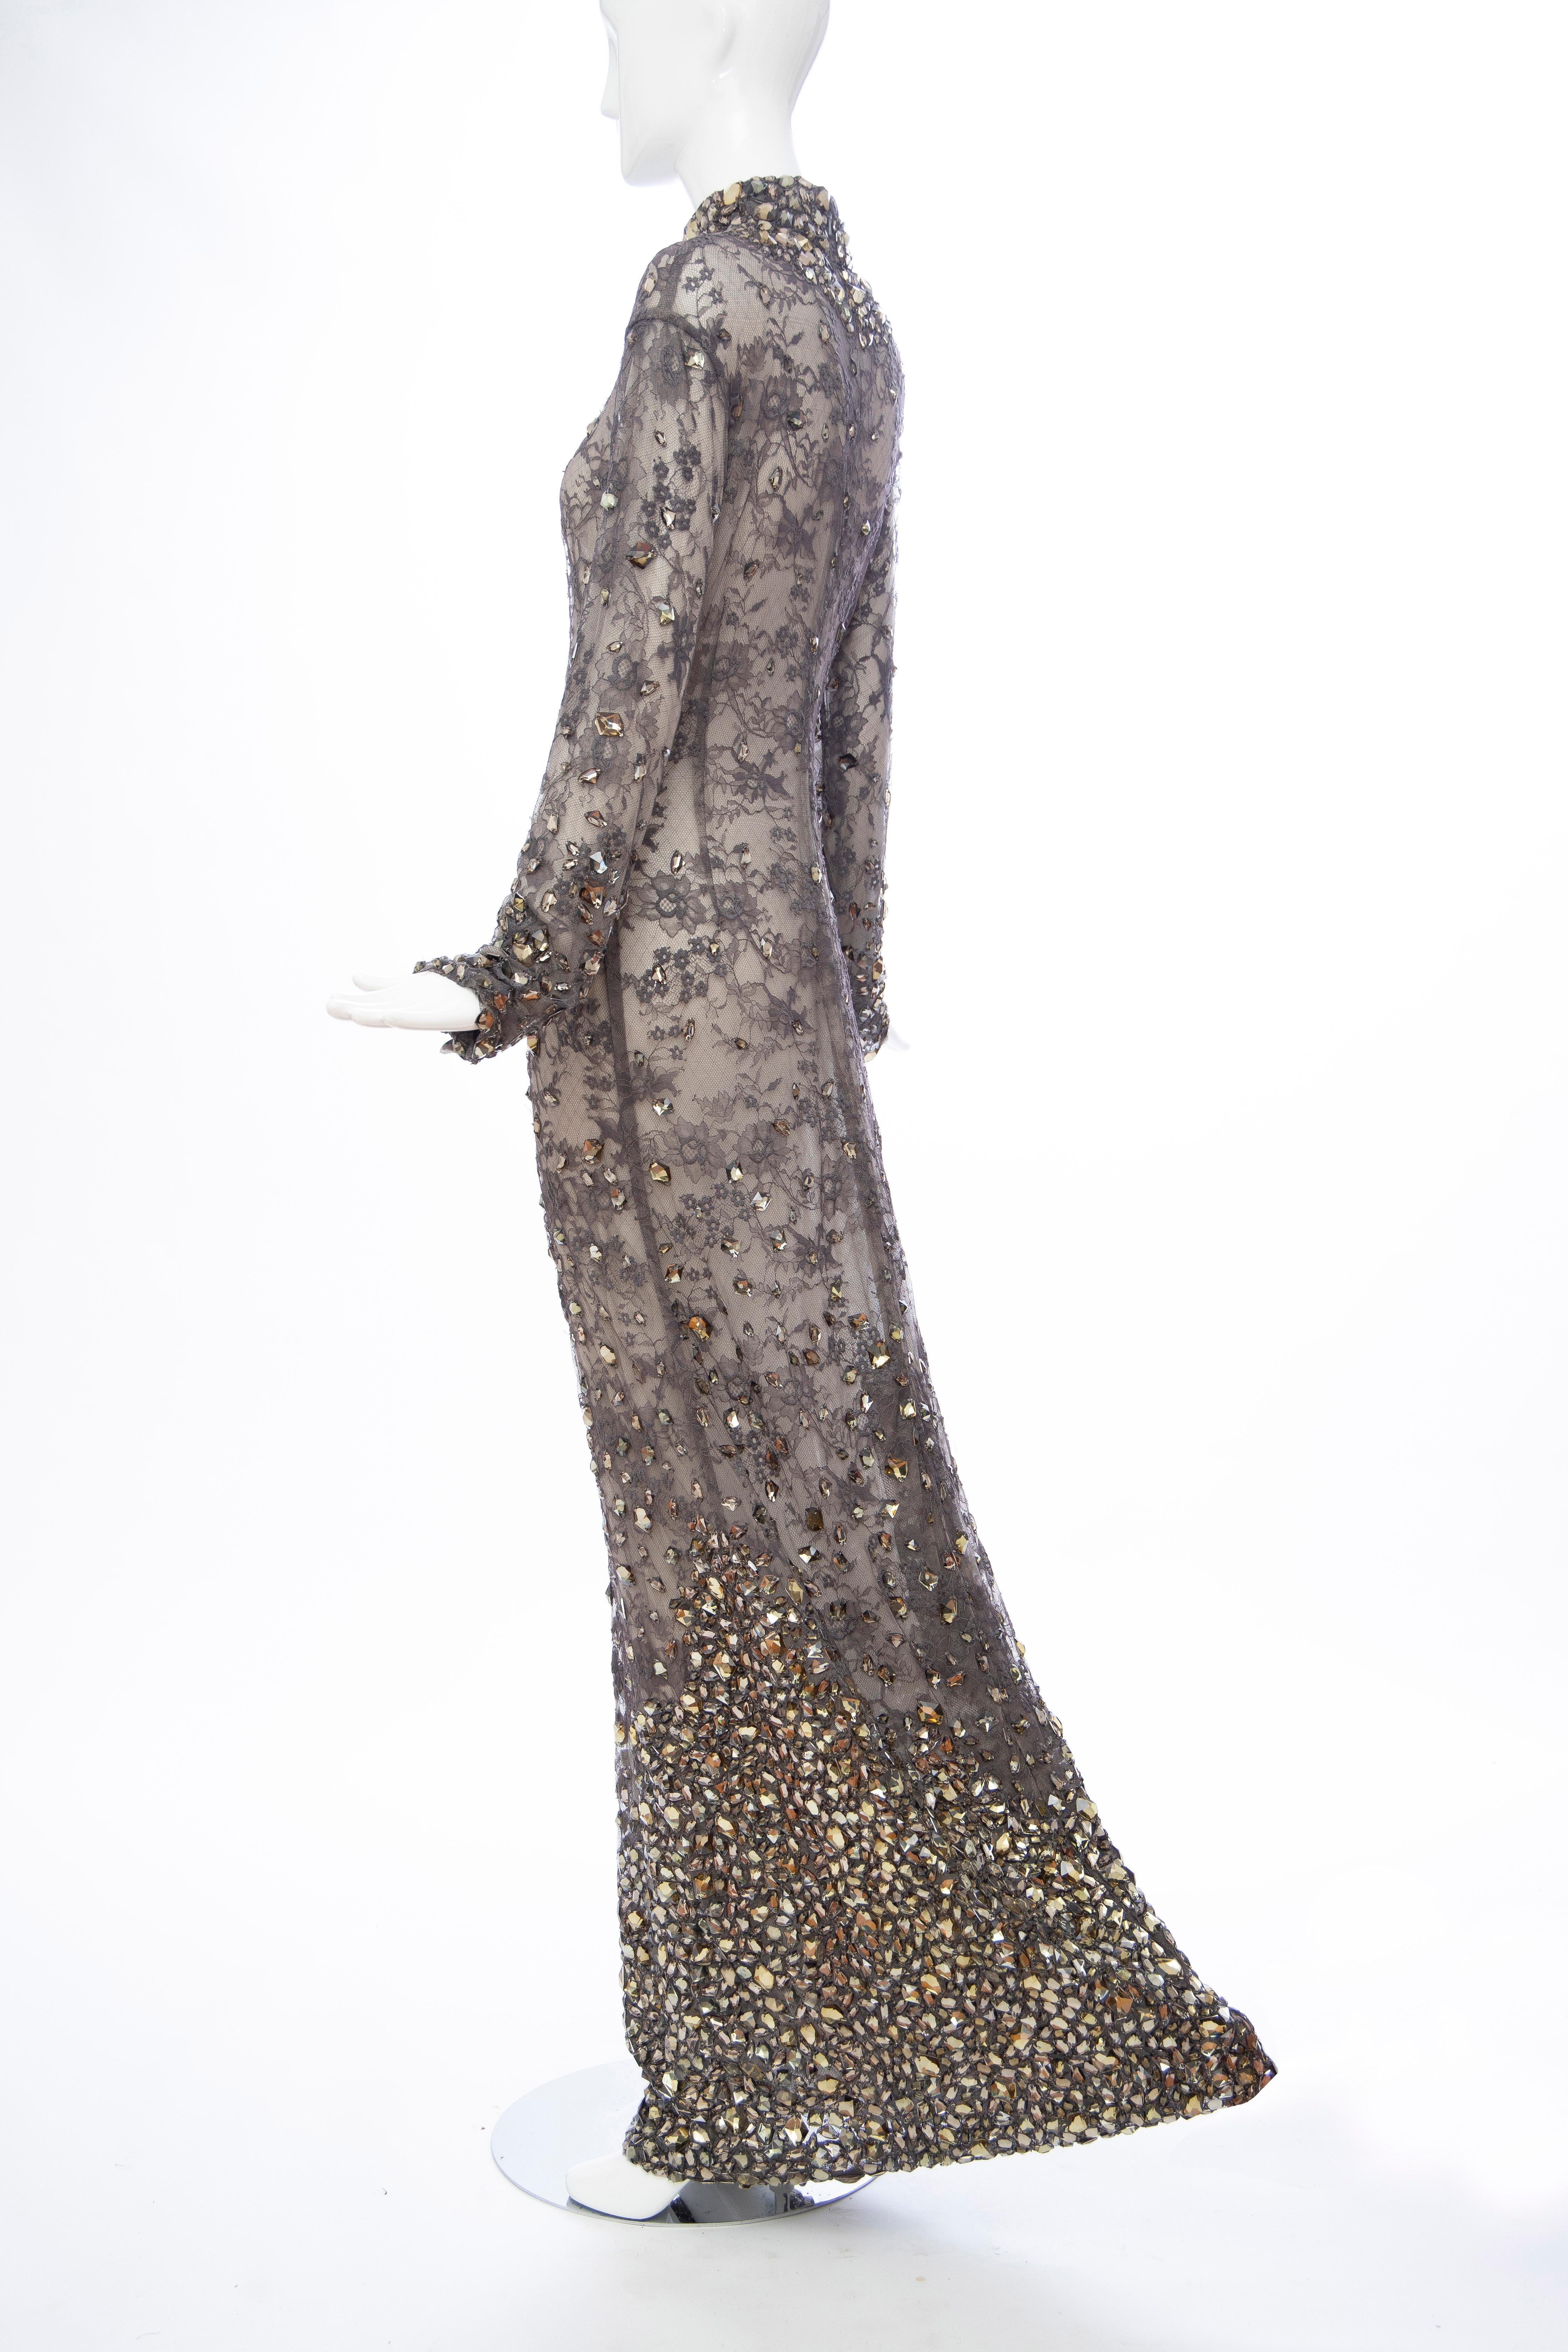 Tom Ford Runway Smokey Grey Lace Appliquéd Faceted Gems Evening Dress, Fall 2011 For Sale 5